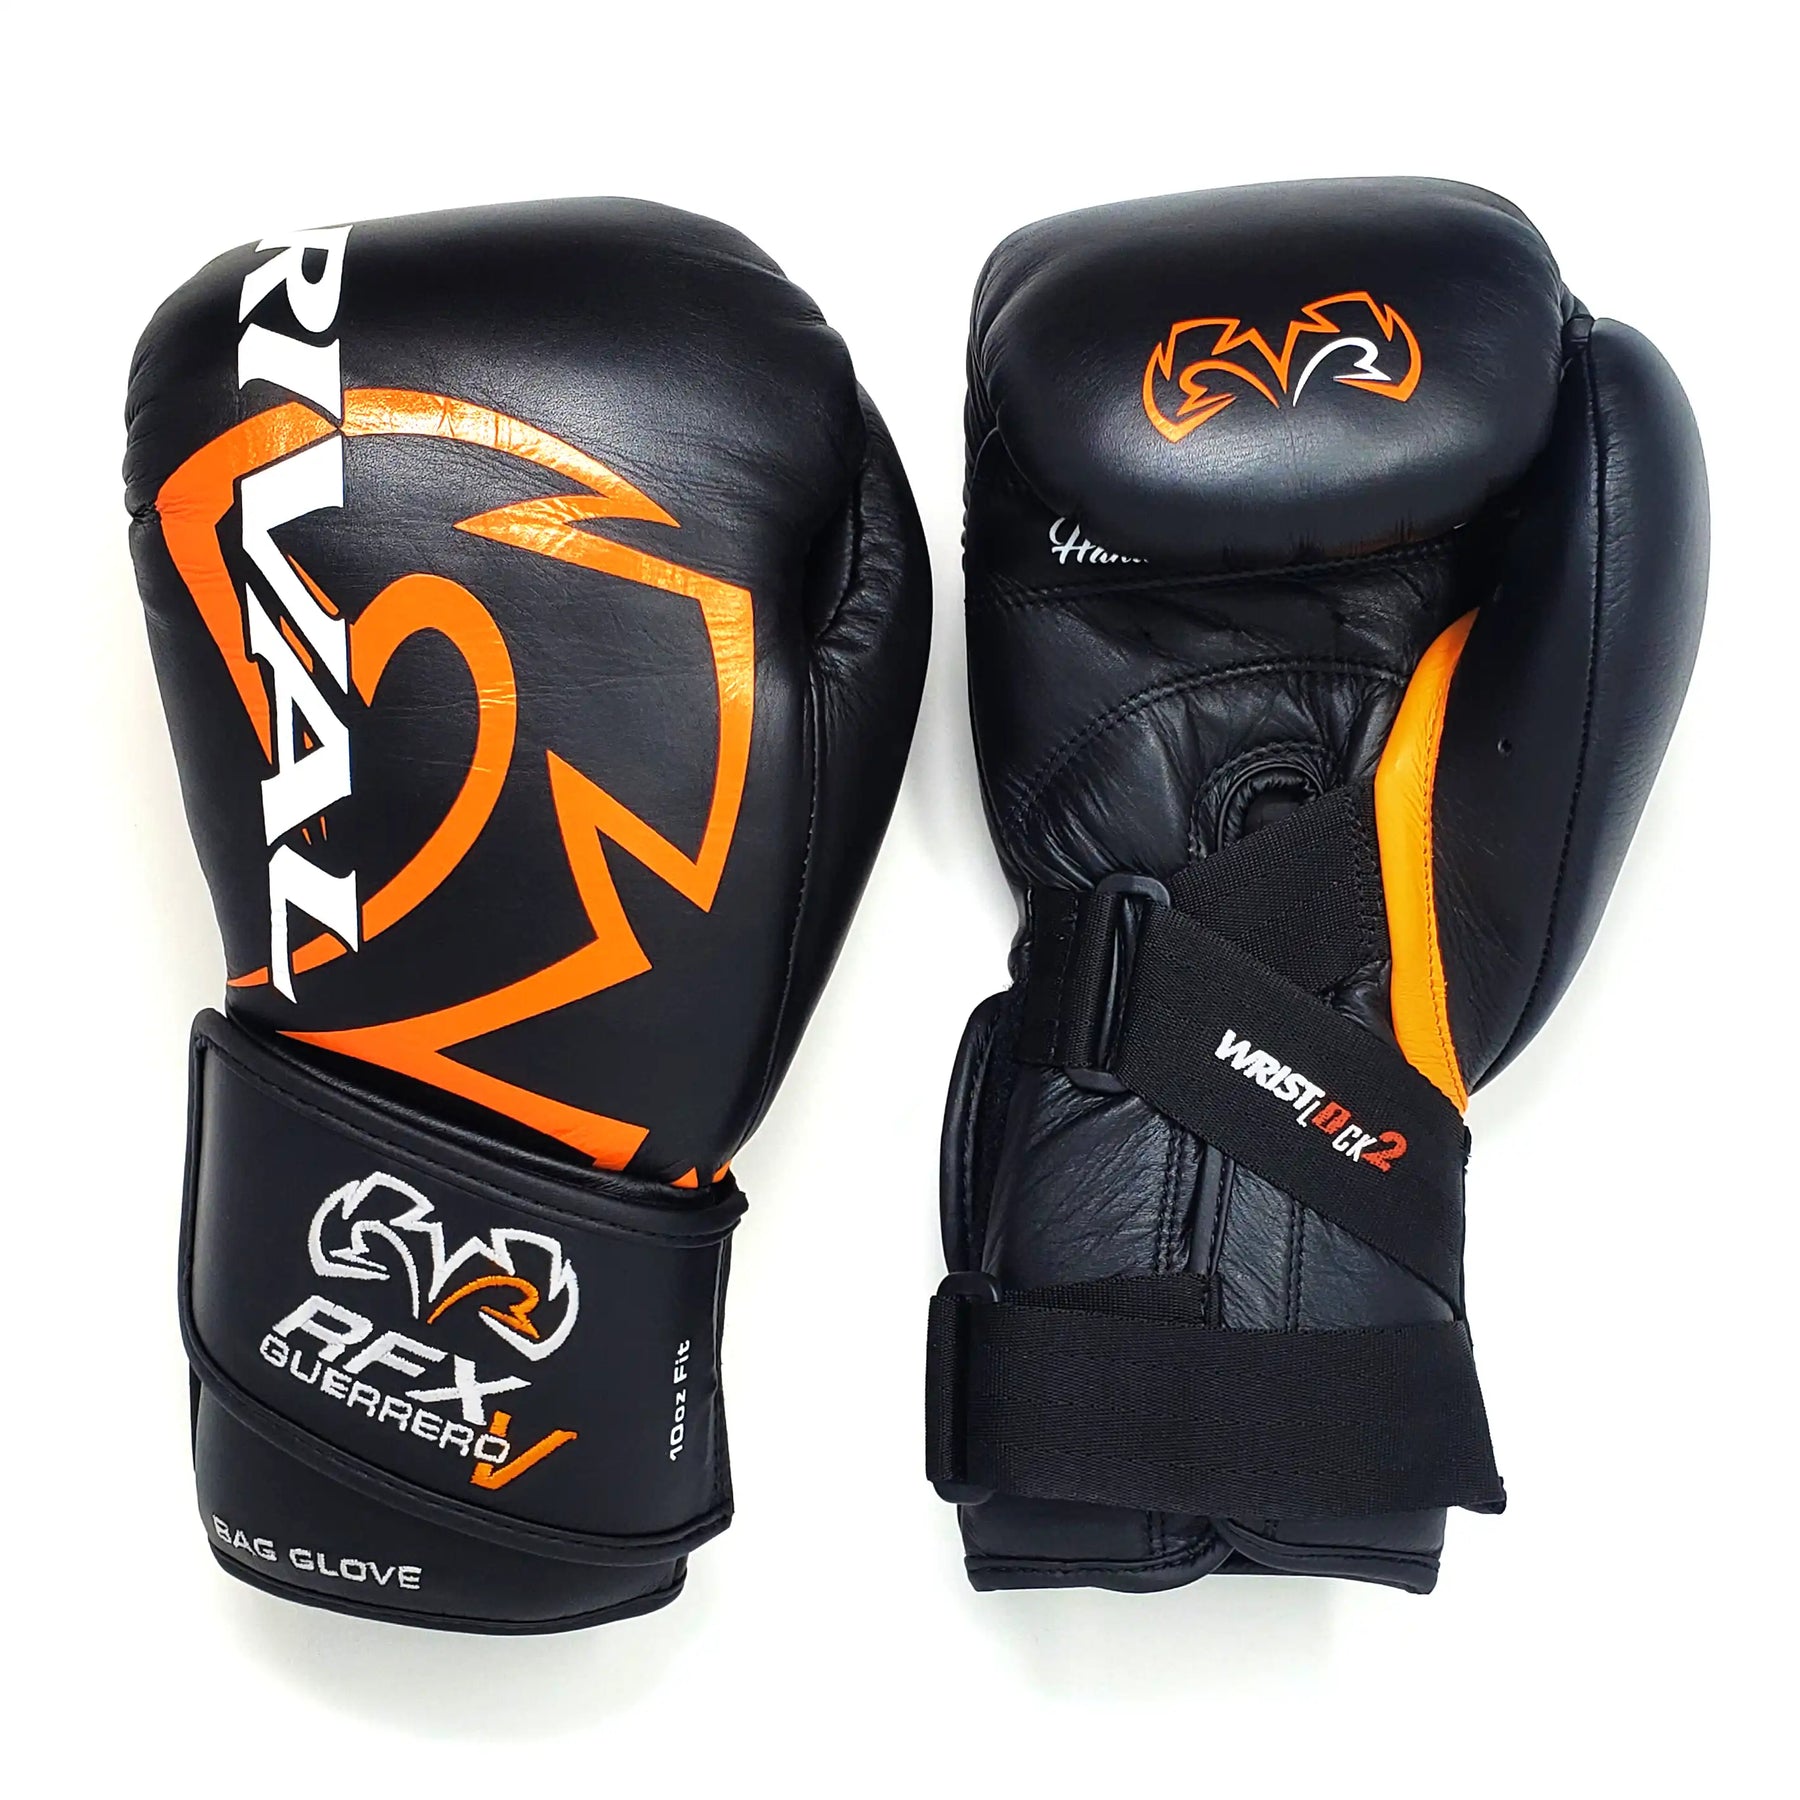 Speed Bags – Rival Boxing Gear USA